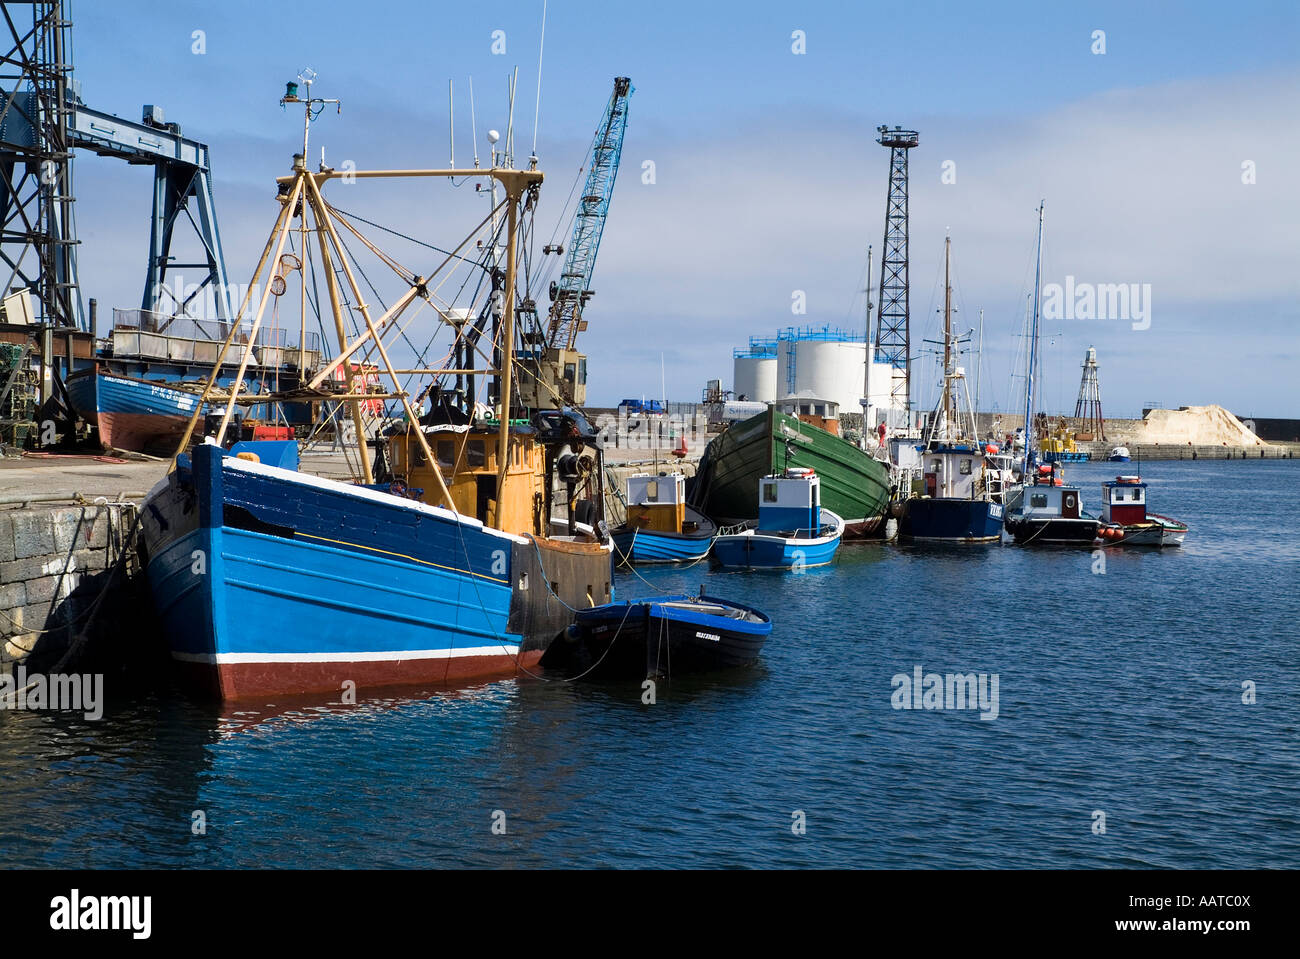 dh Pulteneytown WICK CAITHNESS Scottish Fishing boat alongside quayside Wick Harbour docks scotland moored local fishery boats Stock Photo